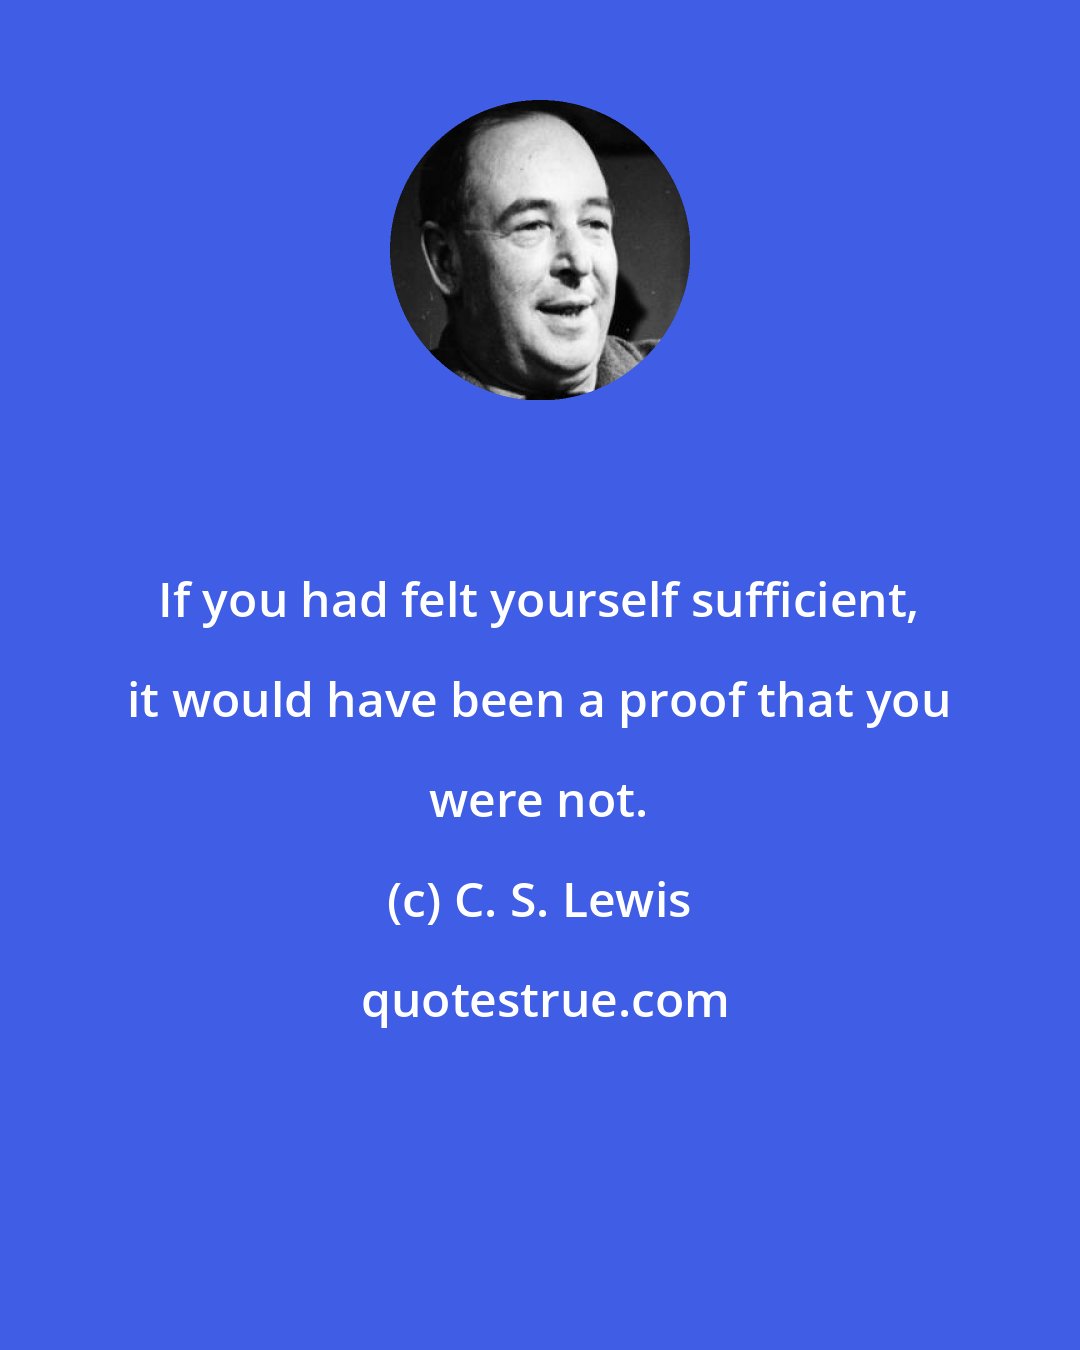 C. S. Lewis: If you had felt yourself sufficient, it would have been a proof that you were not.